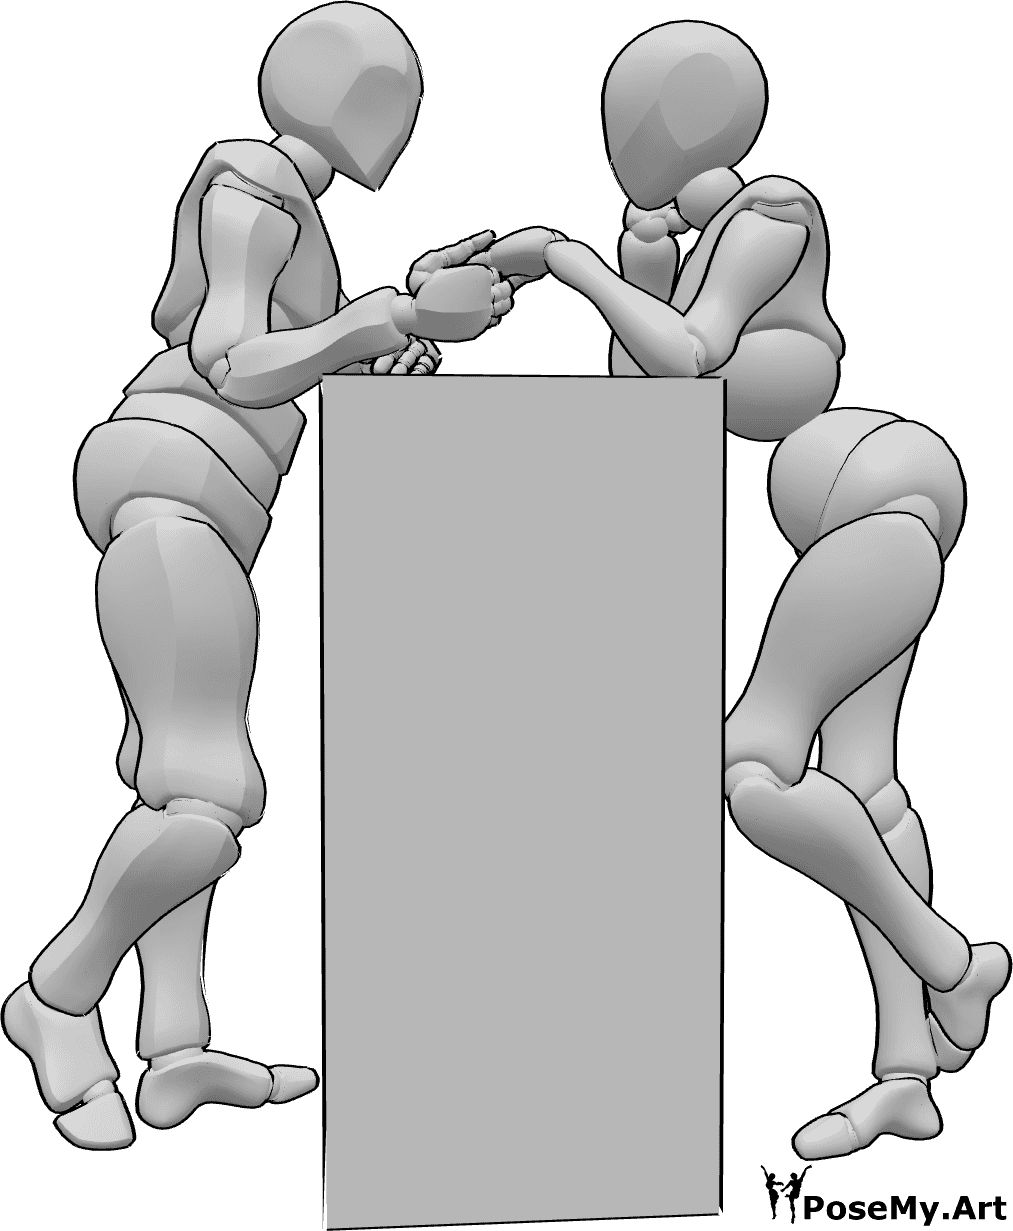 Pose Reference - Romantic kissing hand pose - Female and male are standing, leaning on a table, the male is about to kiss the female's hand